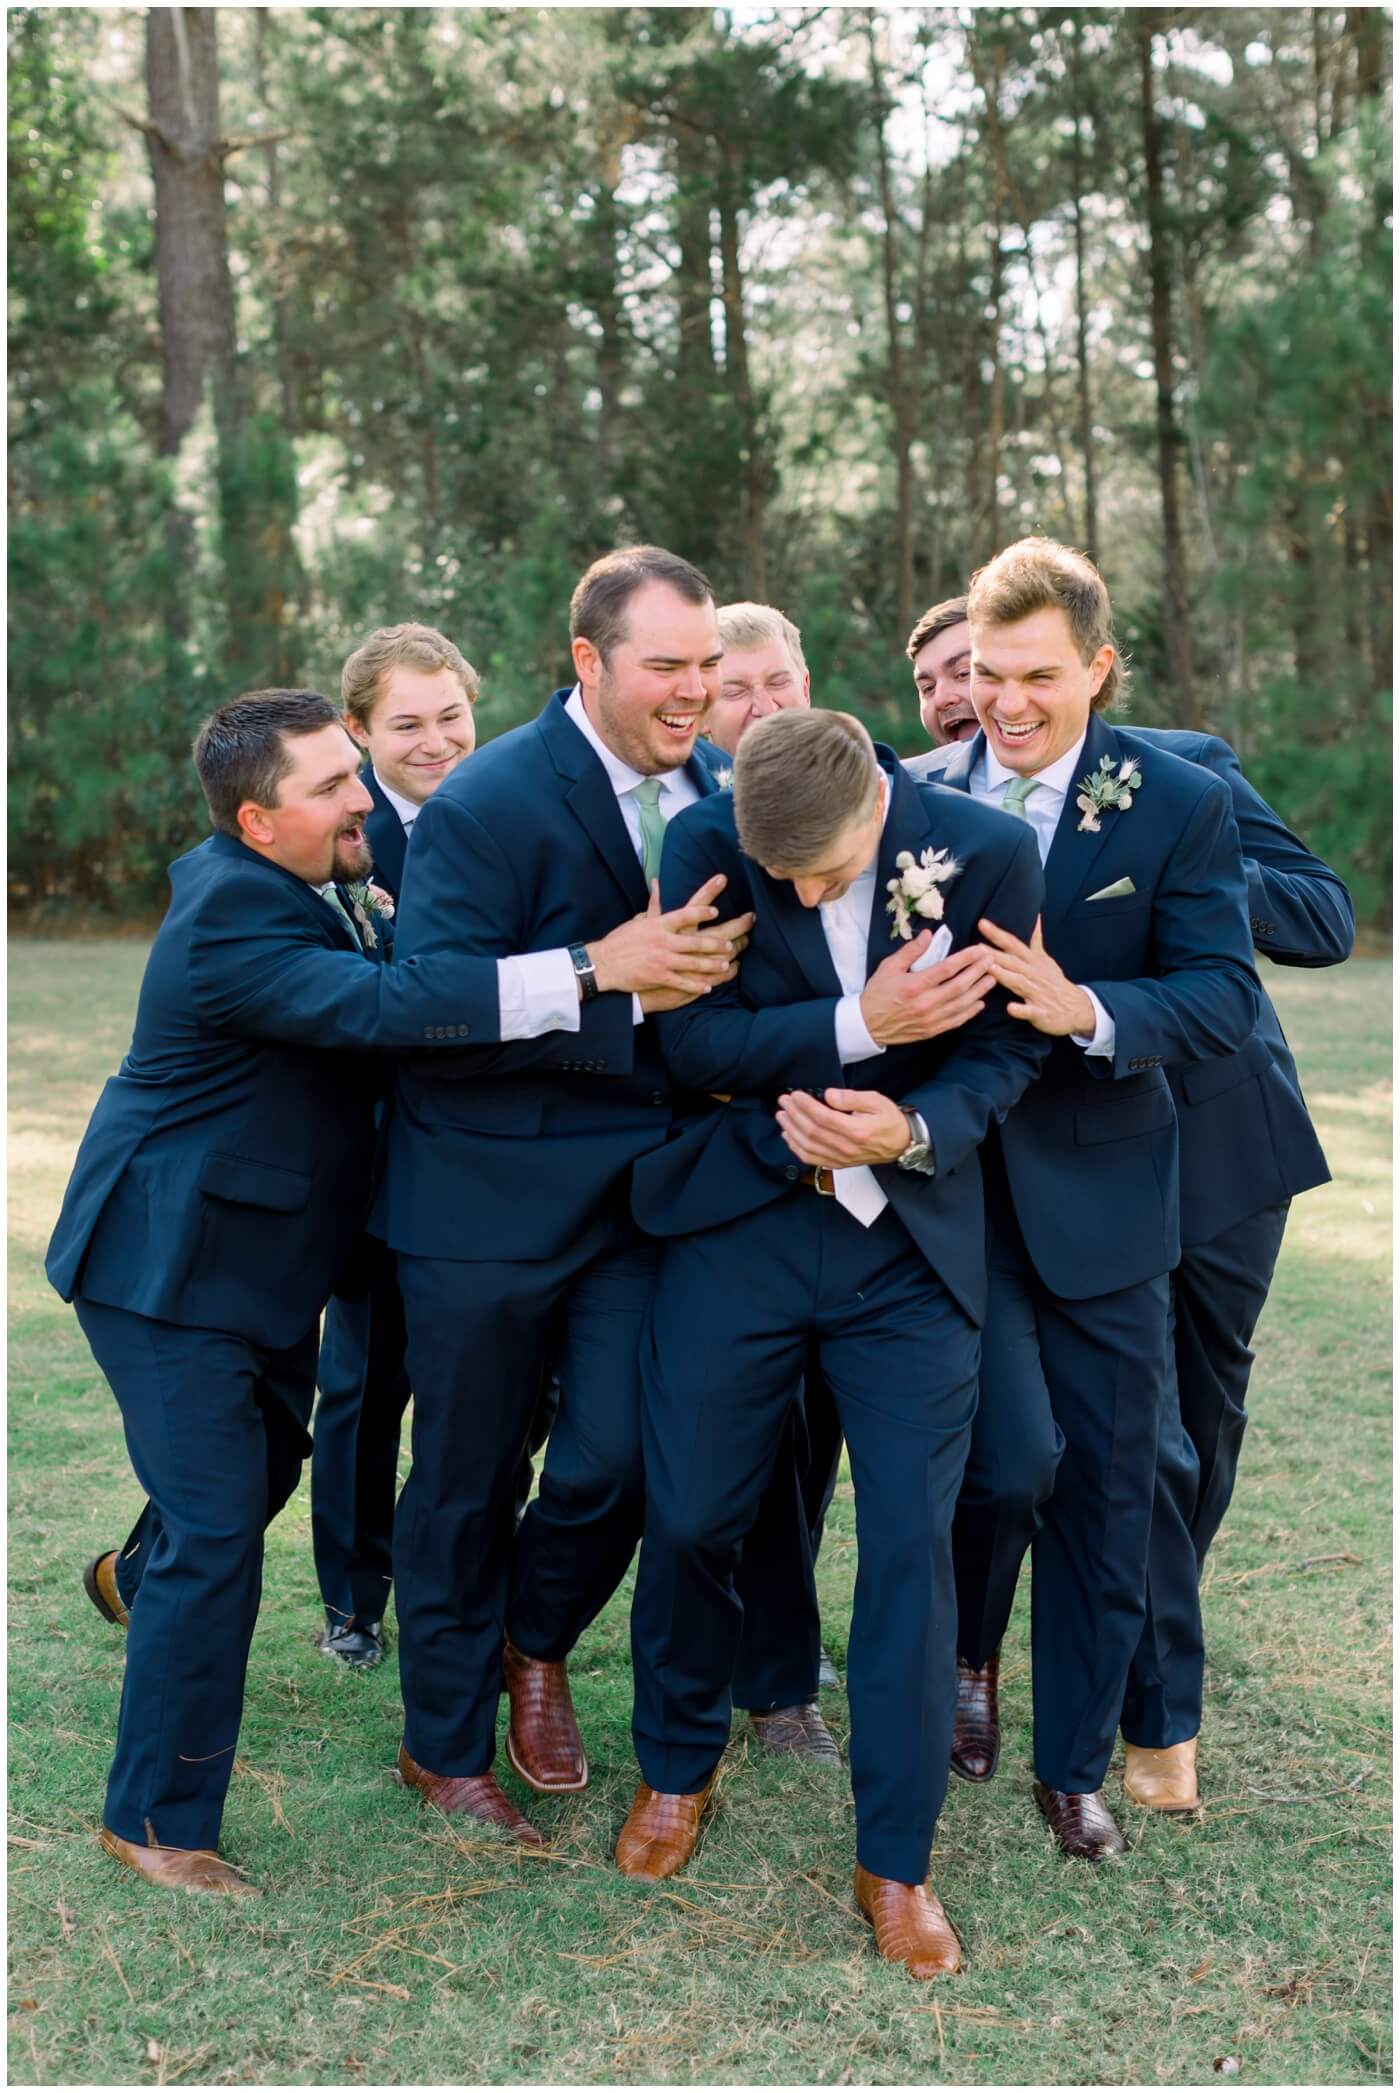 Houston Wedding at The Vine | the groom laughing with his groomsmen